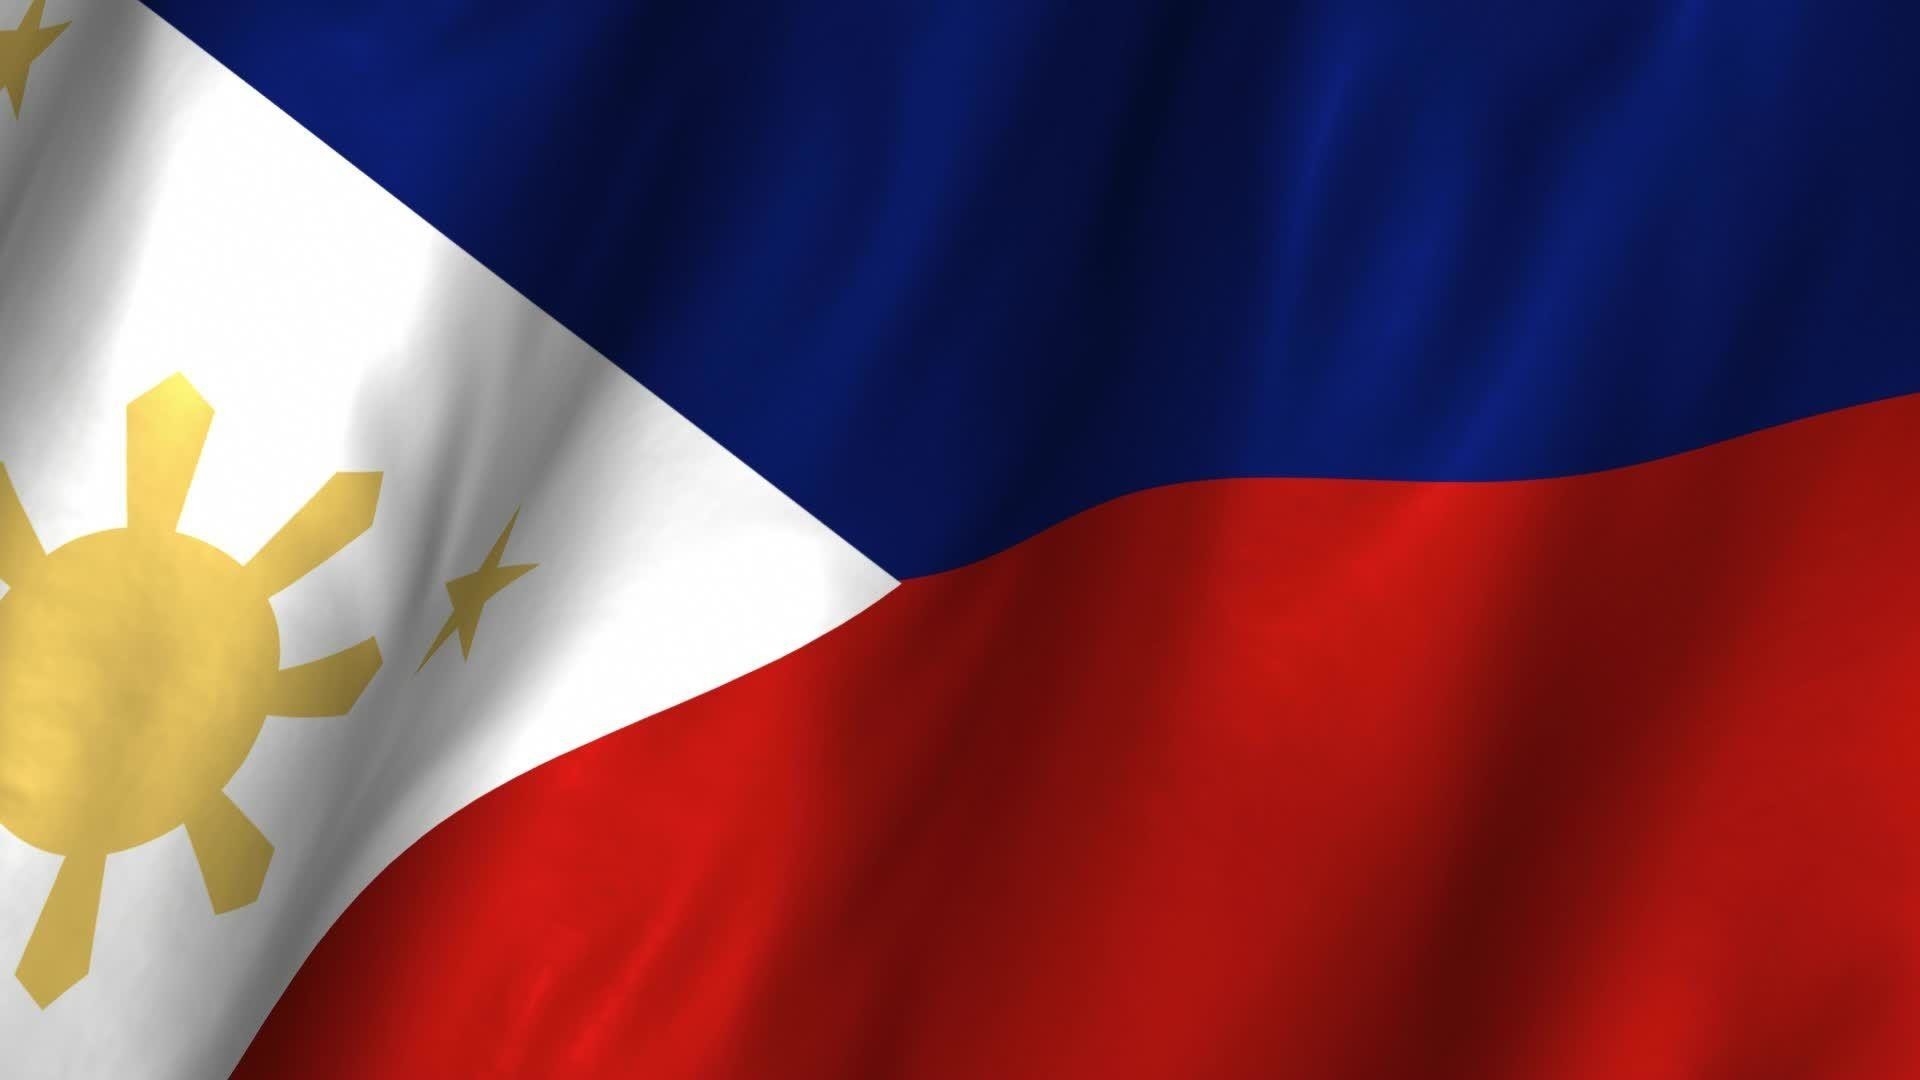 Philippine Flag Wallpapers Images The Best Porn Website